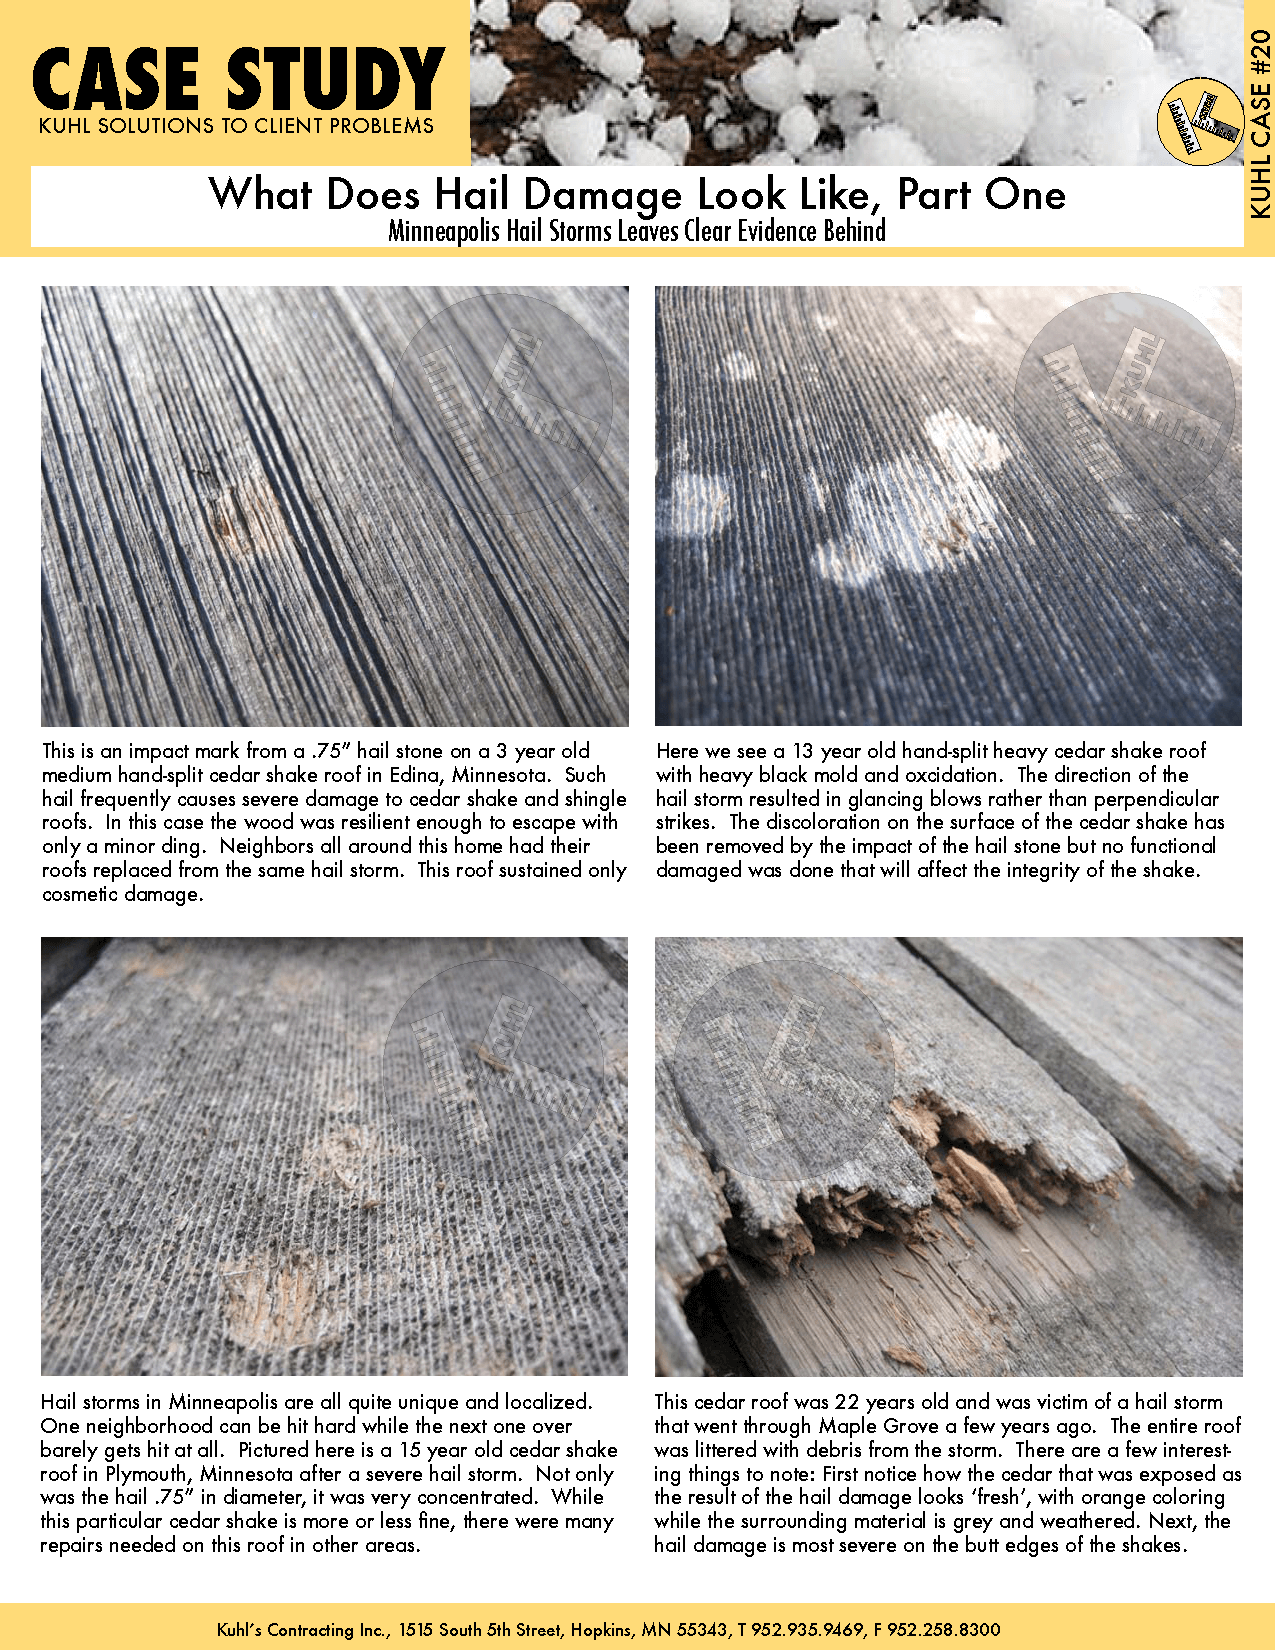 What Does Hail Damage Look Like, Part 1